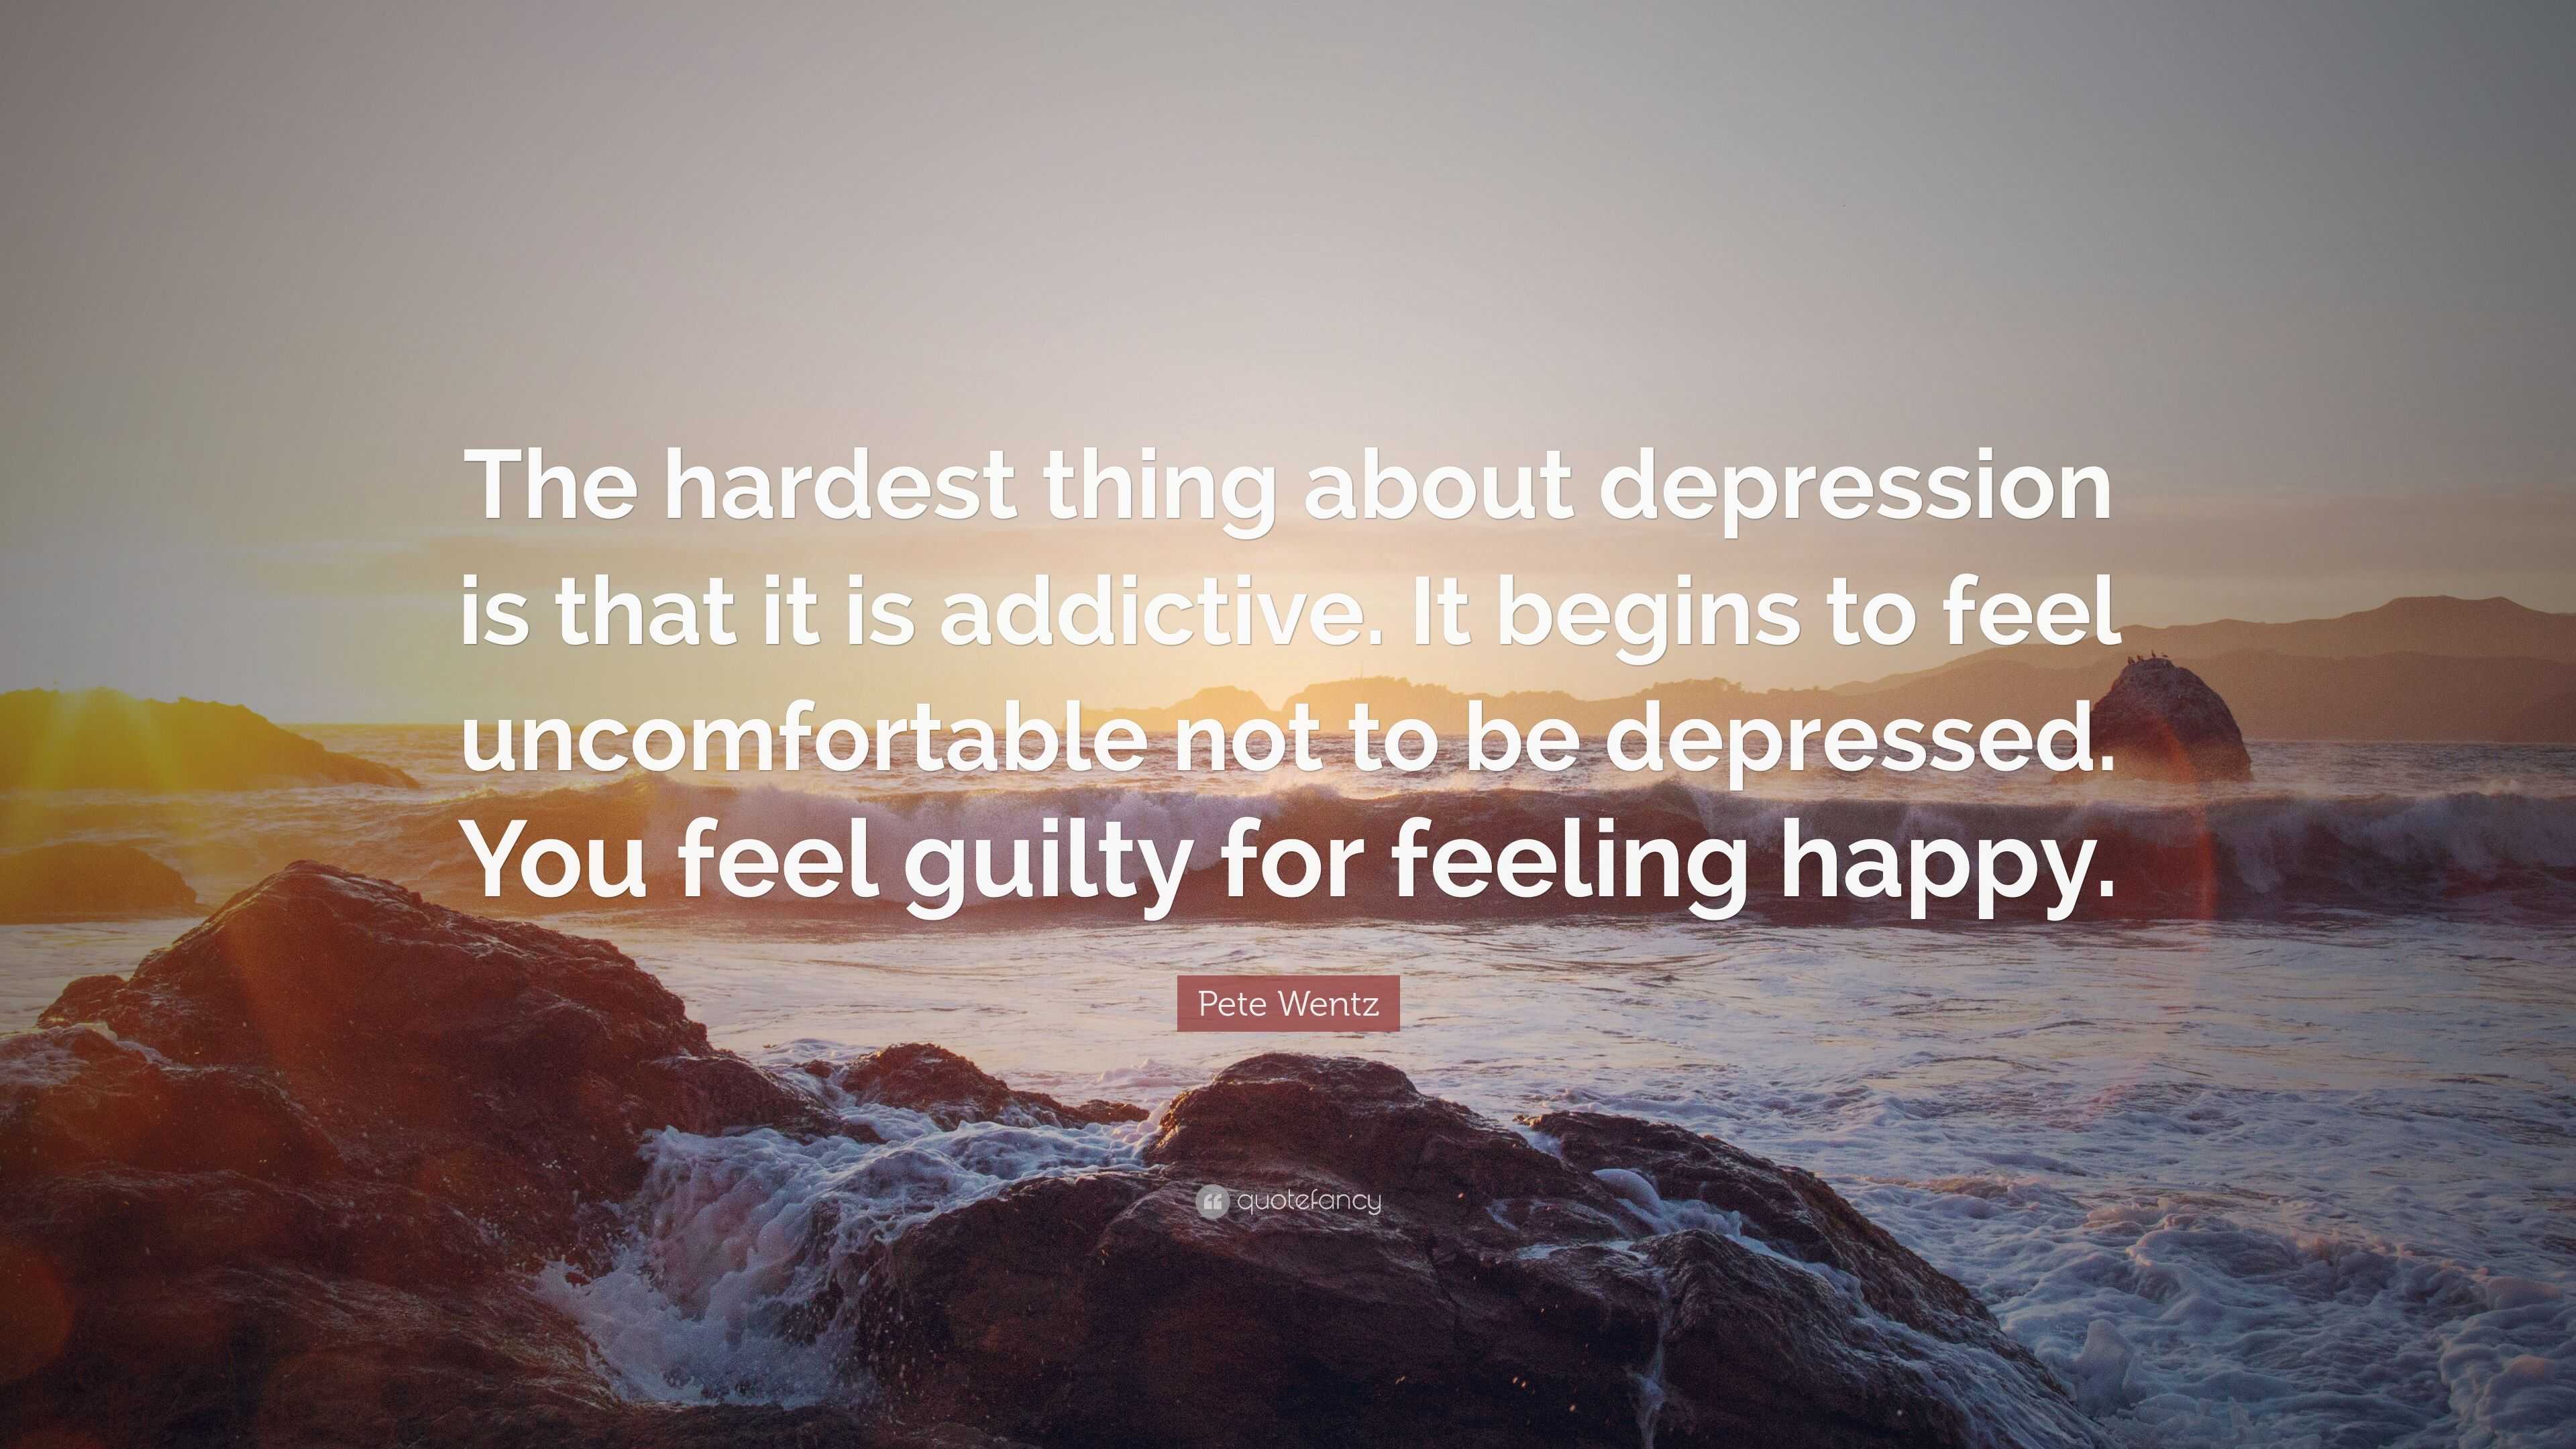 Pete Wentz Quote: “The hardest thing about depression is that it is ...